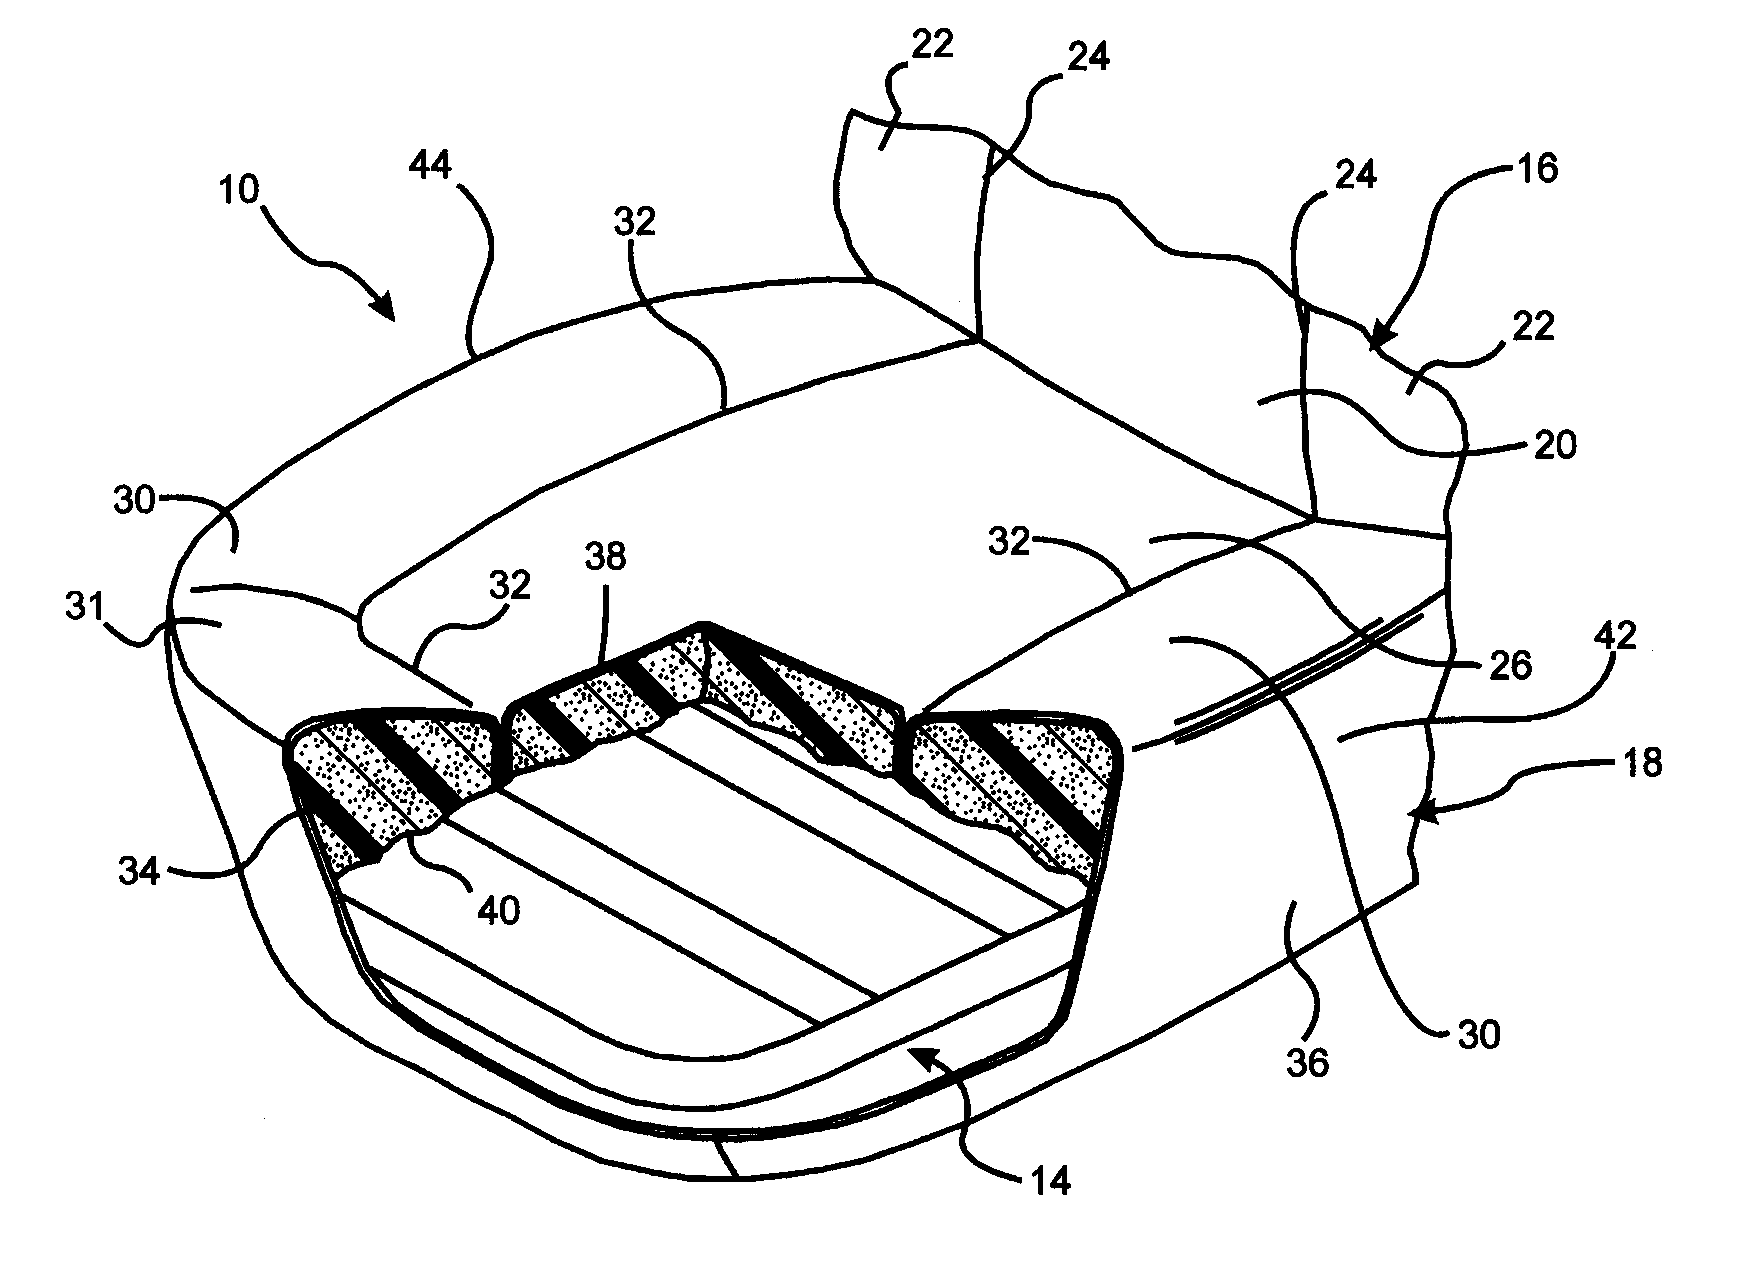 Vehicle seat assembly having a hardness gradient via "a" surface intrusions and/or protrusions